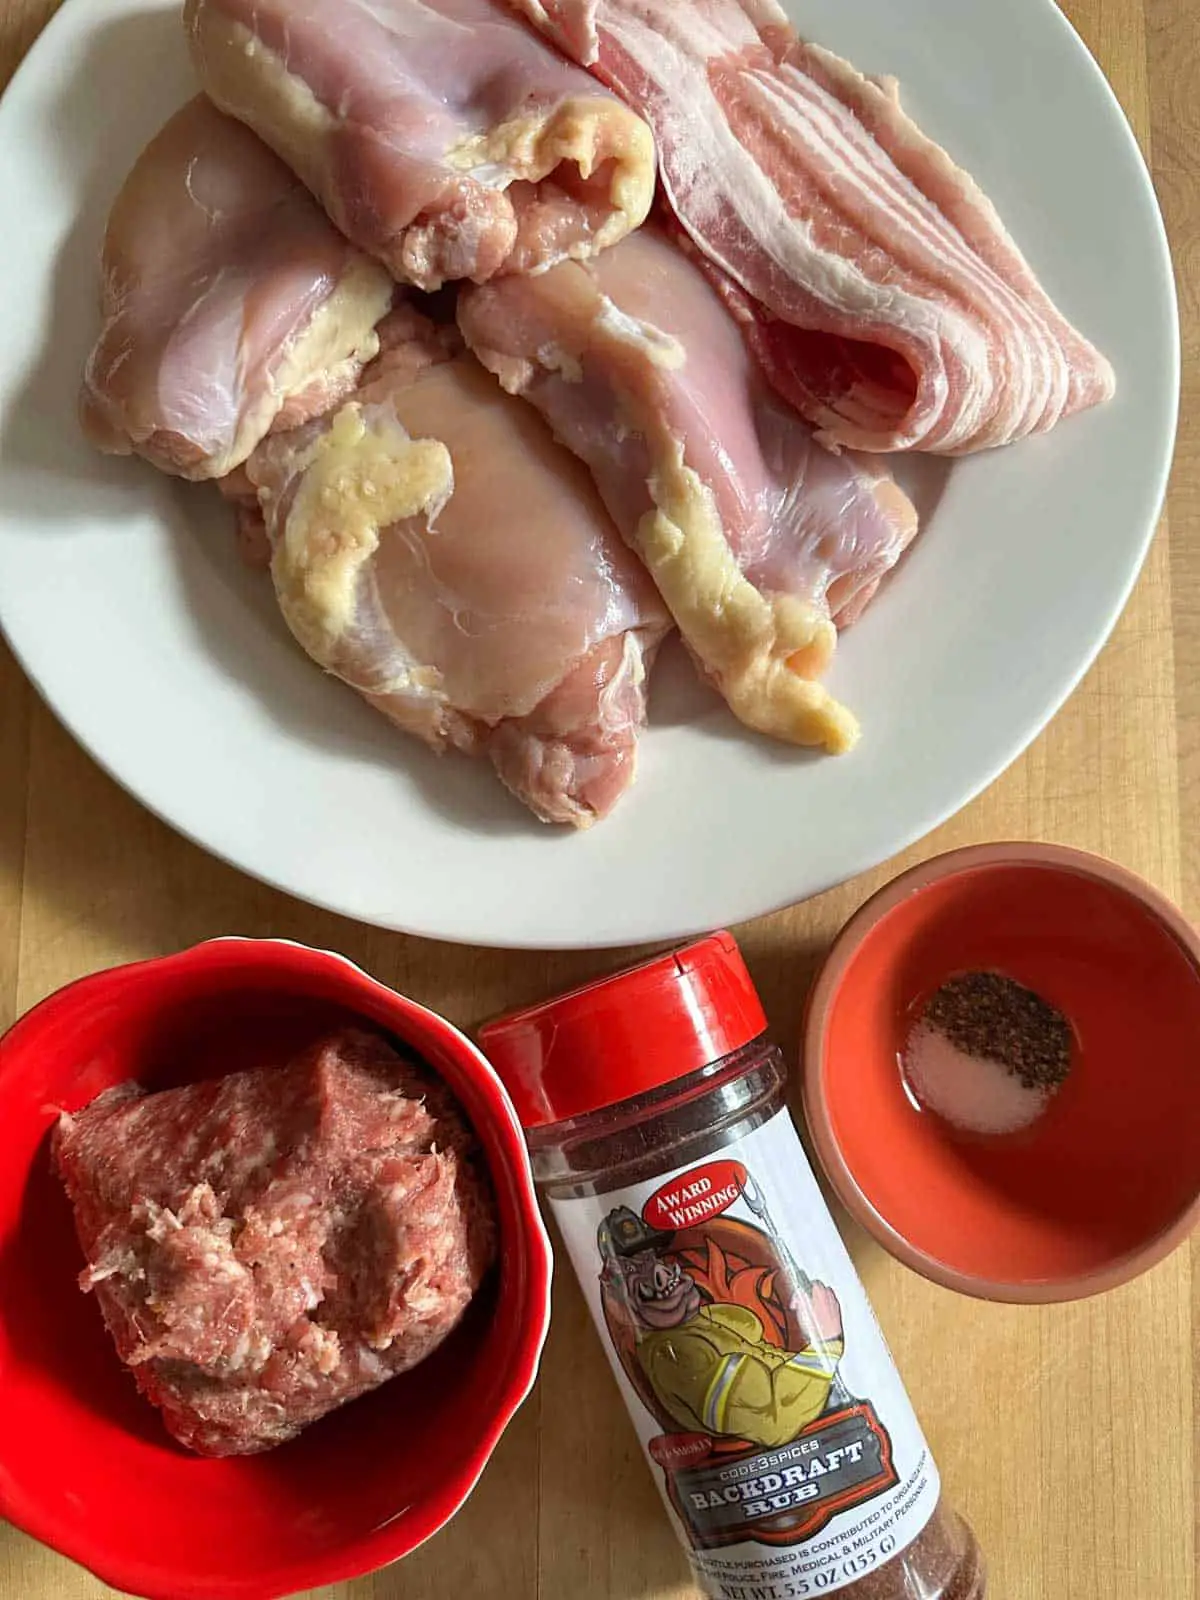 Chicken thighs and pieces of bacon on a white plate, breakfast sausage in a red bowl, a small bowl with salt and pepper, and a bottle of Backdraft Rub.